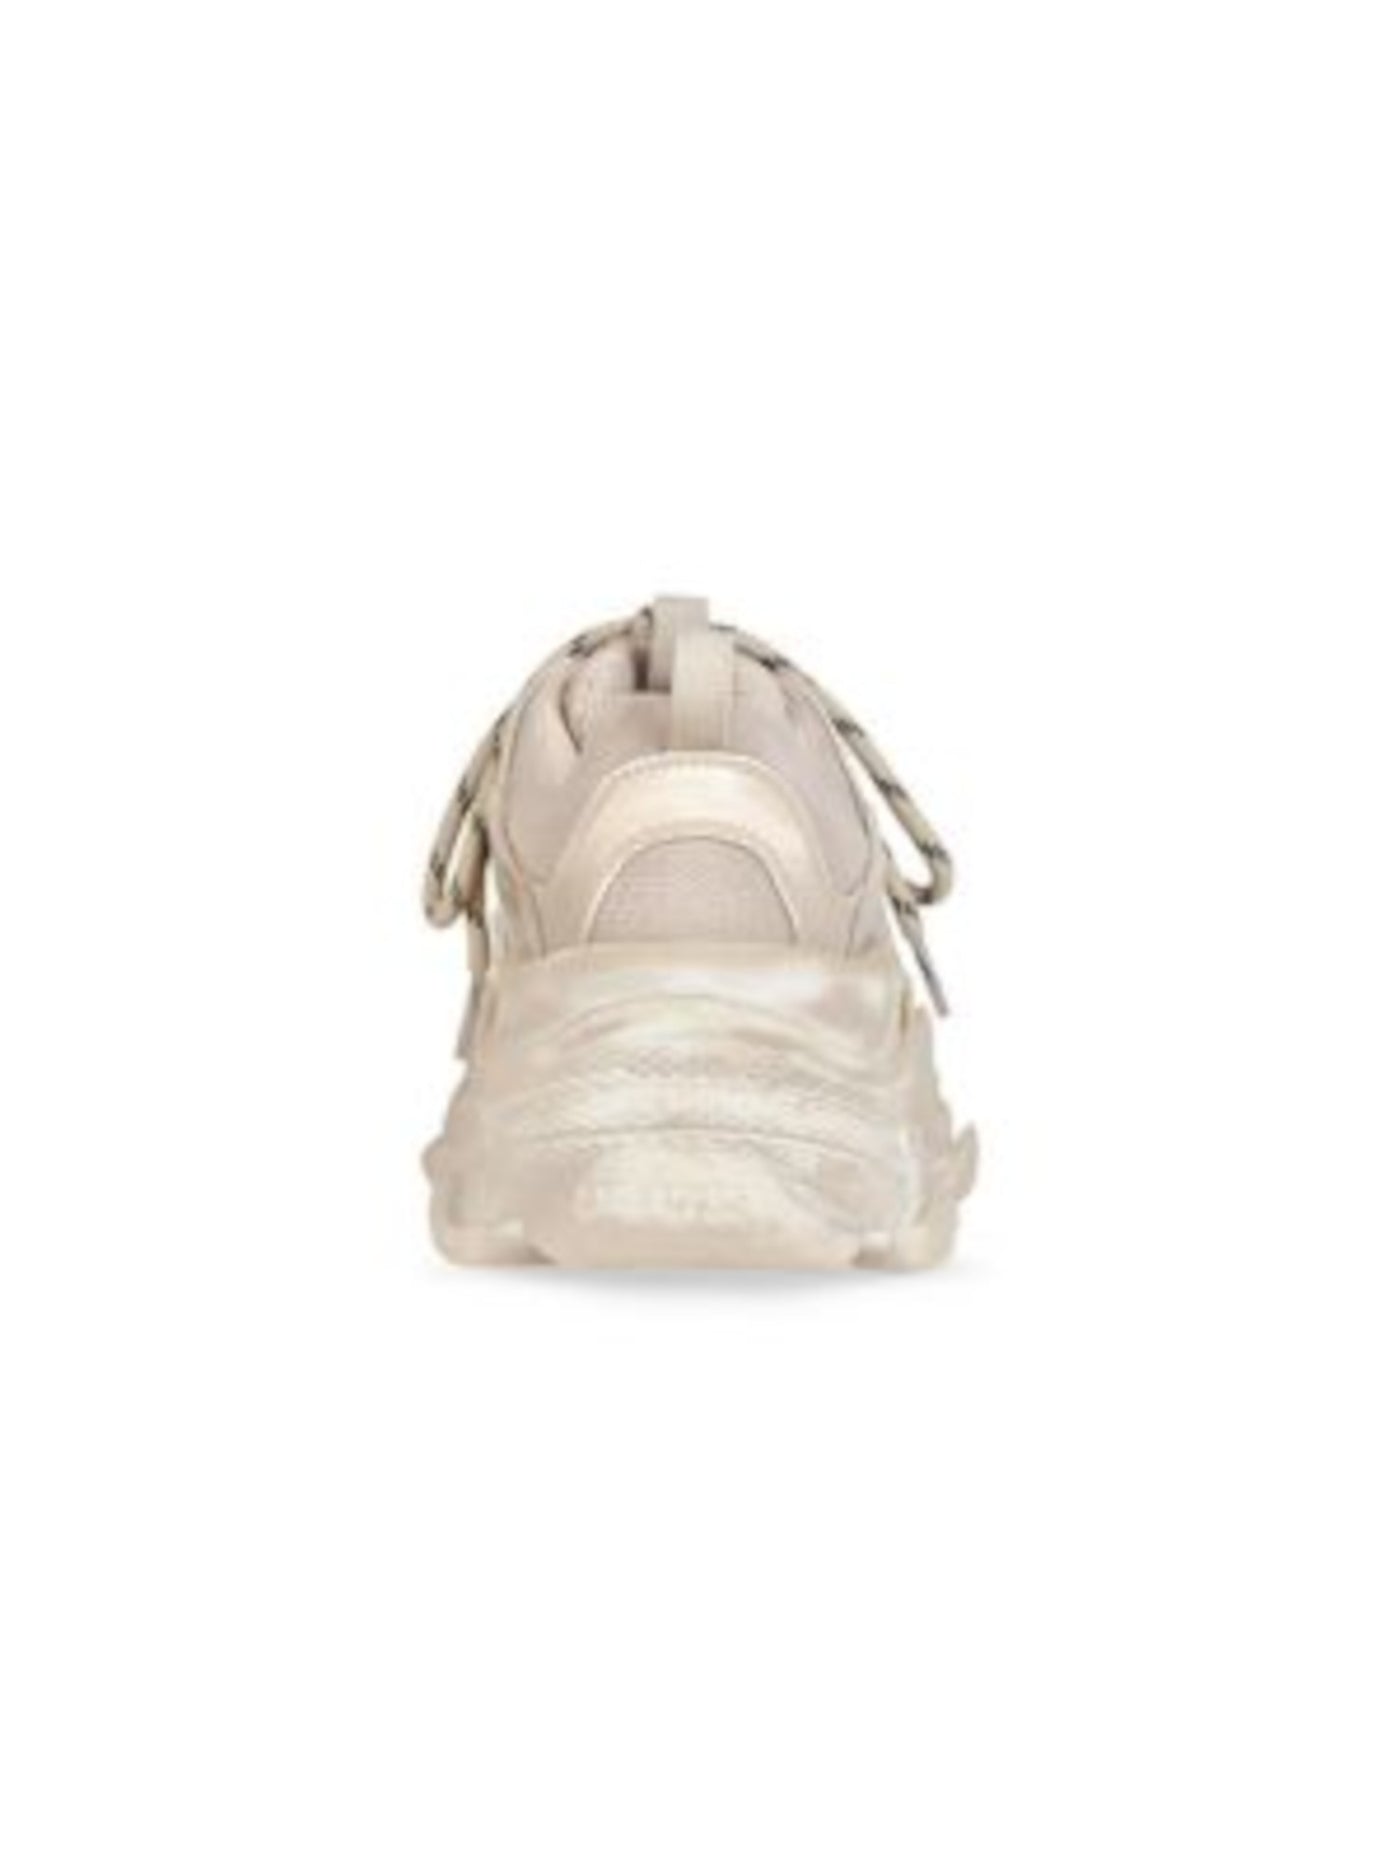 BALENCIAGA Womens Beige Distressed Removable Insole Triple S Round Toe Lace-Up Athletic Sneakers Shoes 11